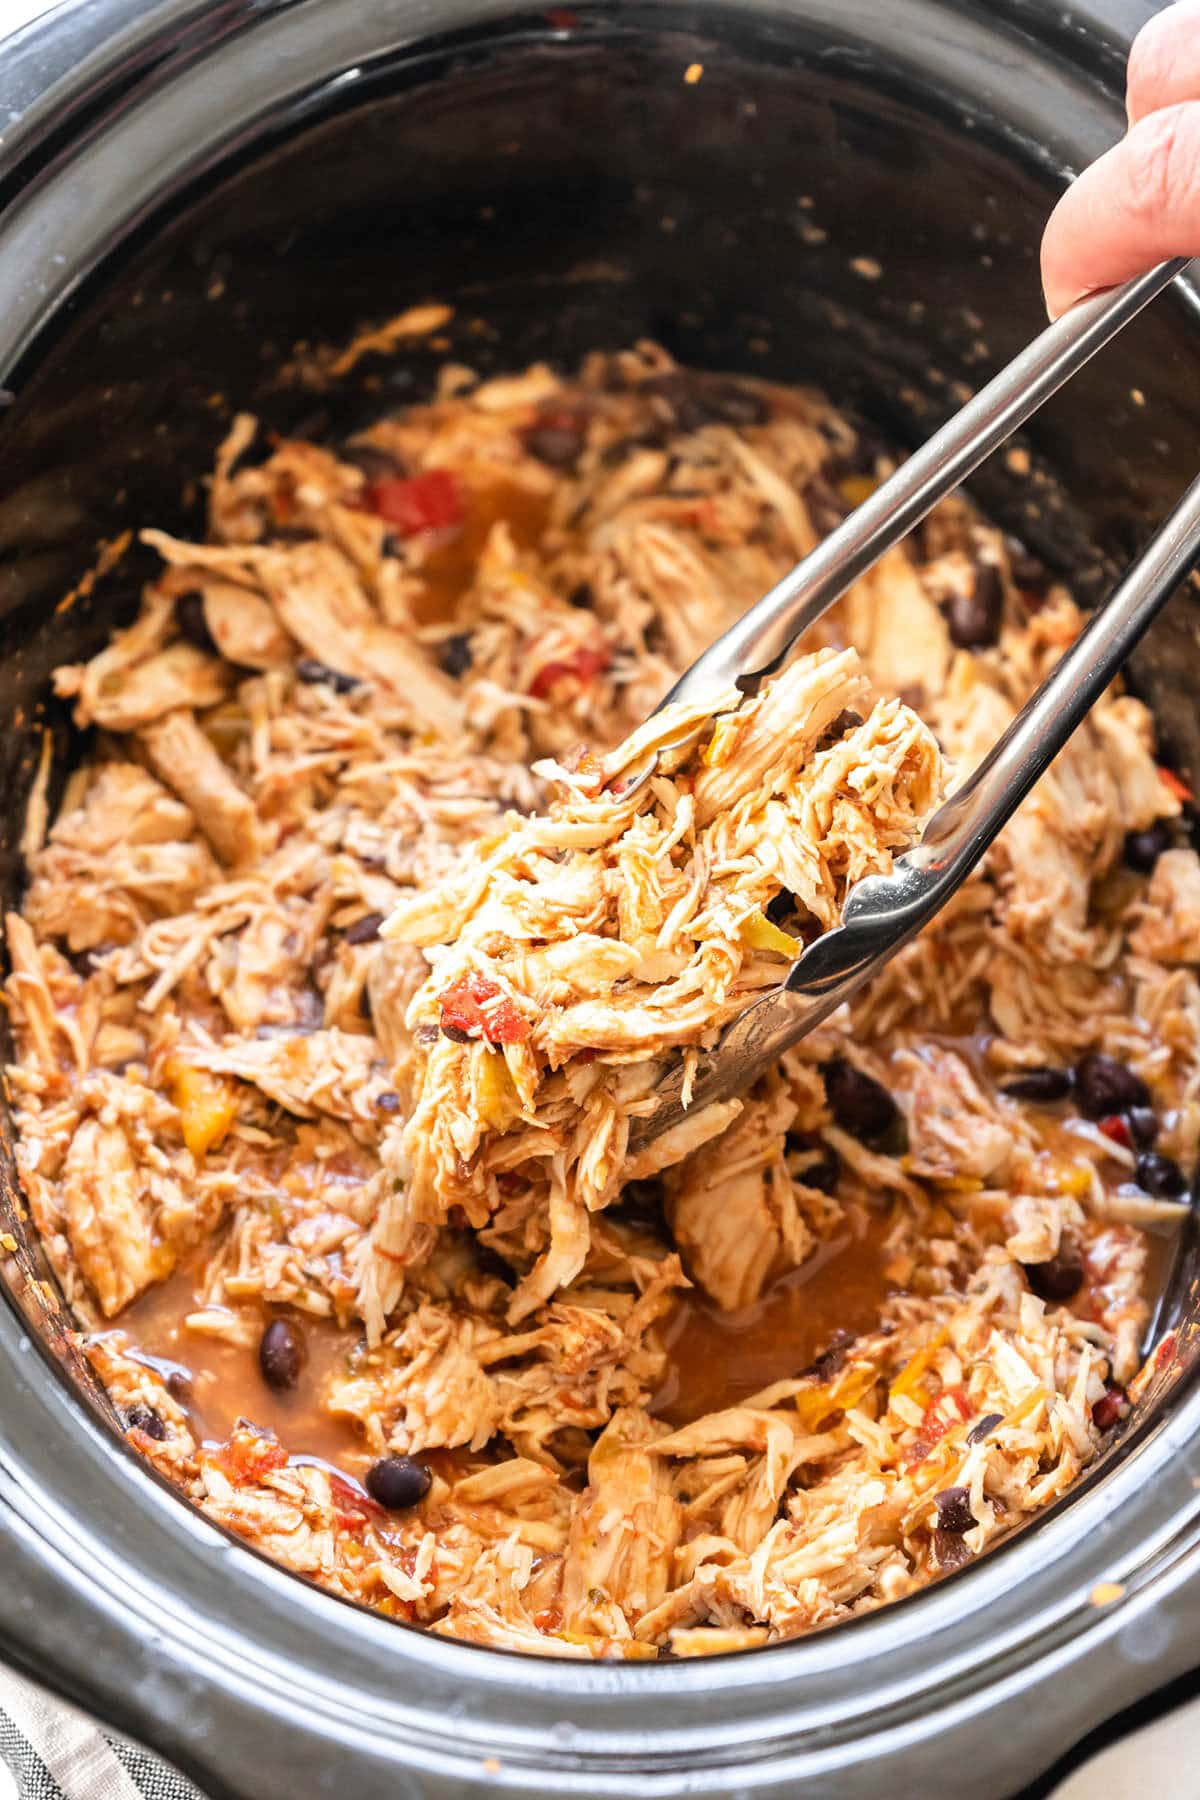 Shredded chicken taco meat in slow cooker with tongs for serving.